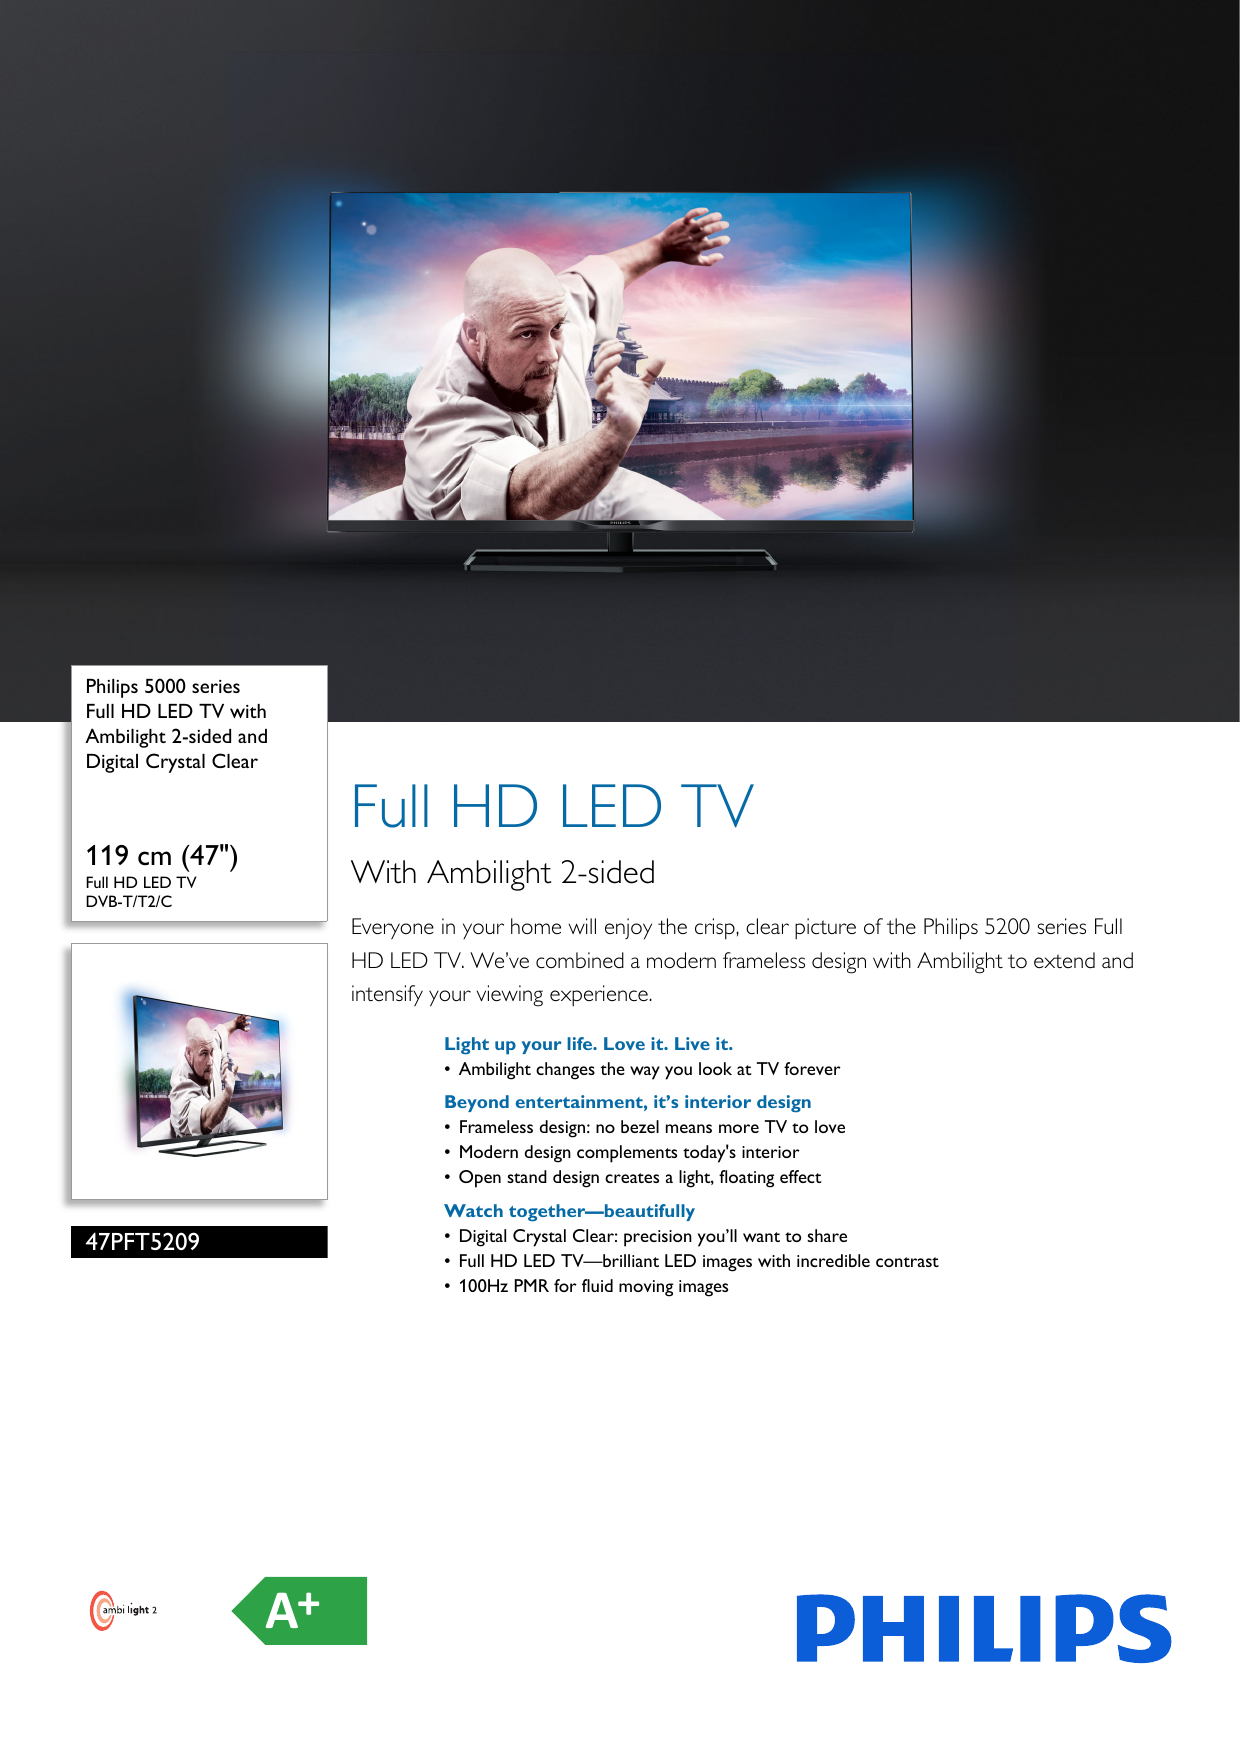 Page 1 of 3 - Philips 47PFT5209/12 Full HD LED TV With Ambilight 2-sided And Digital Crystal Clear User Manual Leaflet 47pft5209 12 Pss